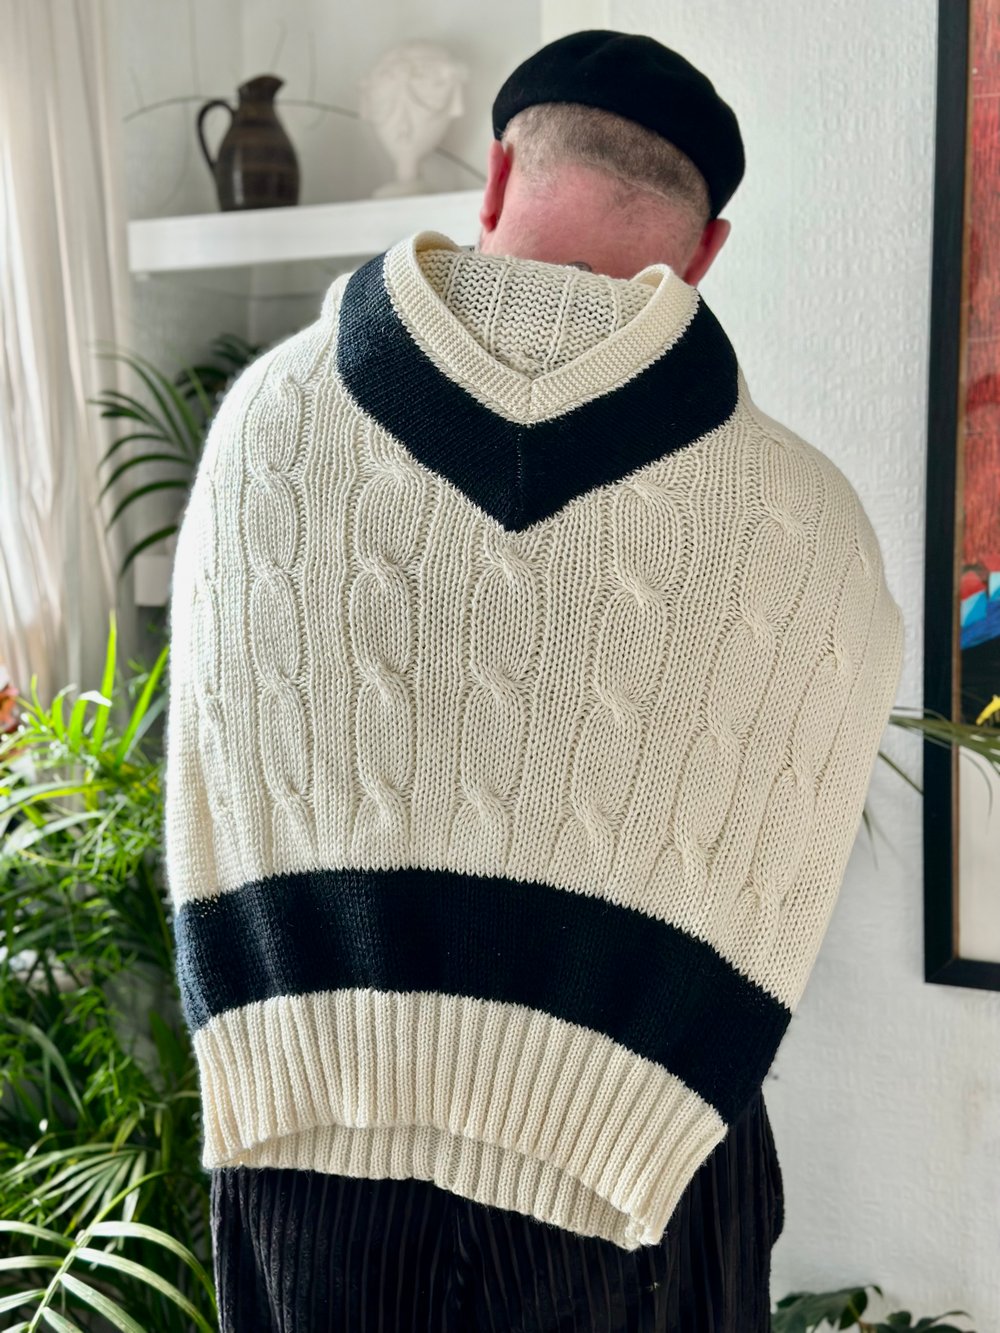 THE SIMPLE CRICKET JUMPER